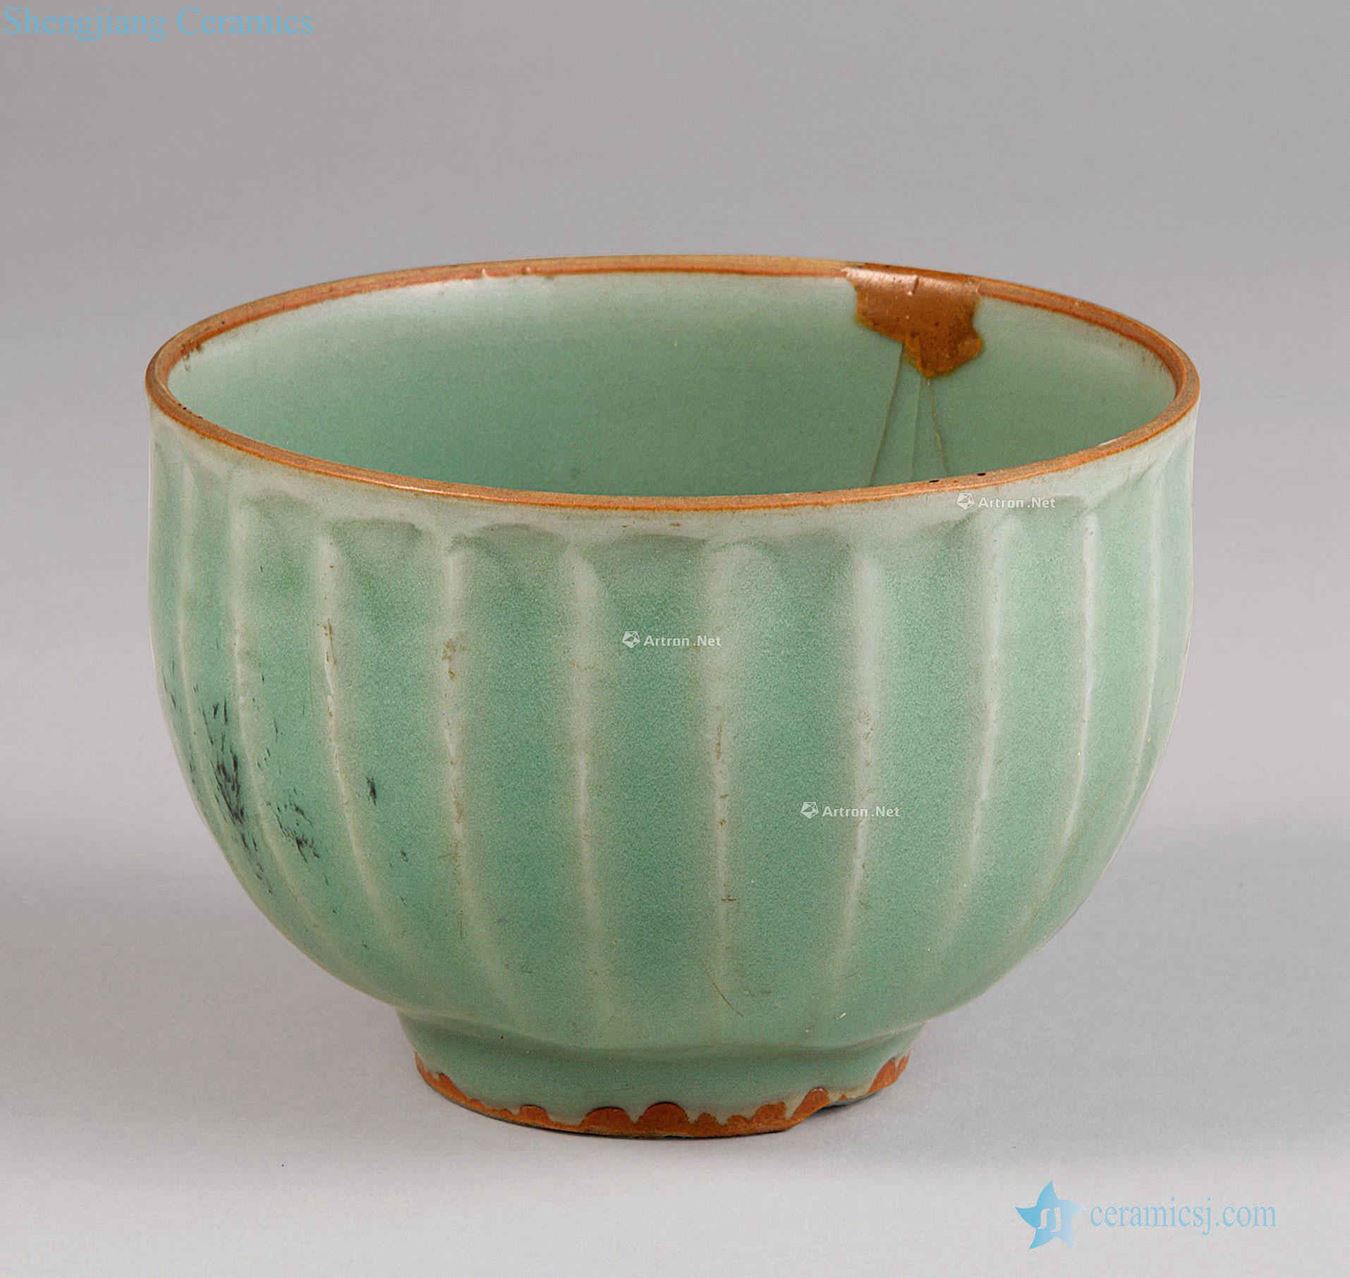 The song dynasty Longquan celadon green magnetic lotus-shaped cans